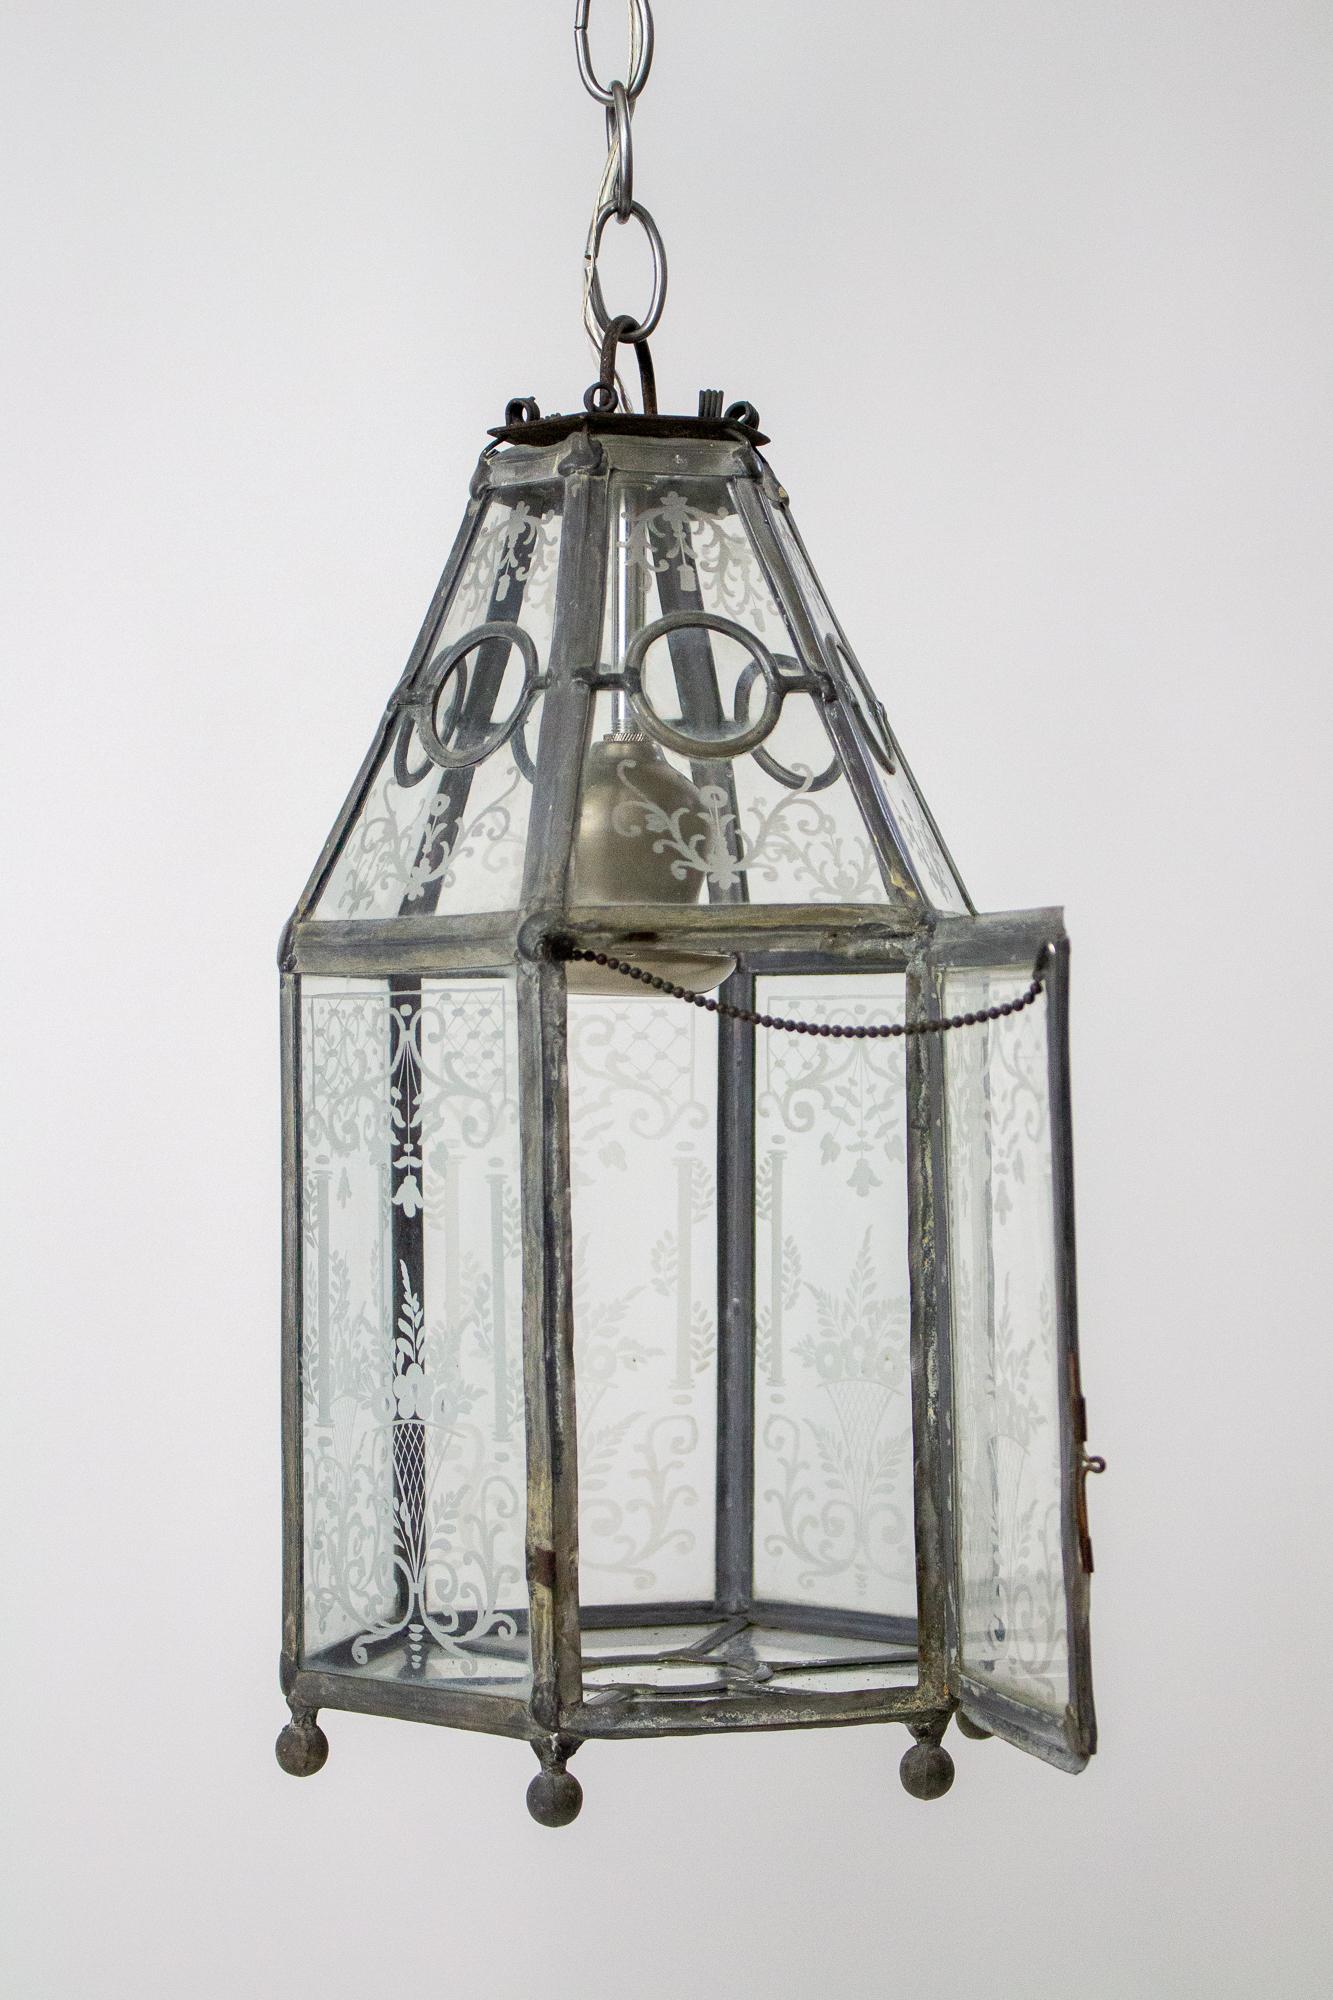 A hexagonal leaded glass lantern. The glass panels are wheel engraved with a curved foliate flower basket design. The top panels slant to the top and have clear round glass pieces. The bottom is flat with a circular center panel and six trapezoidal